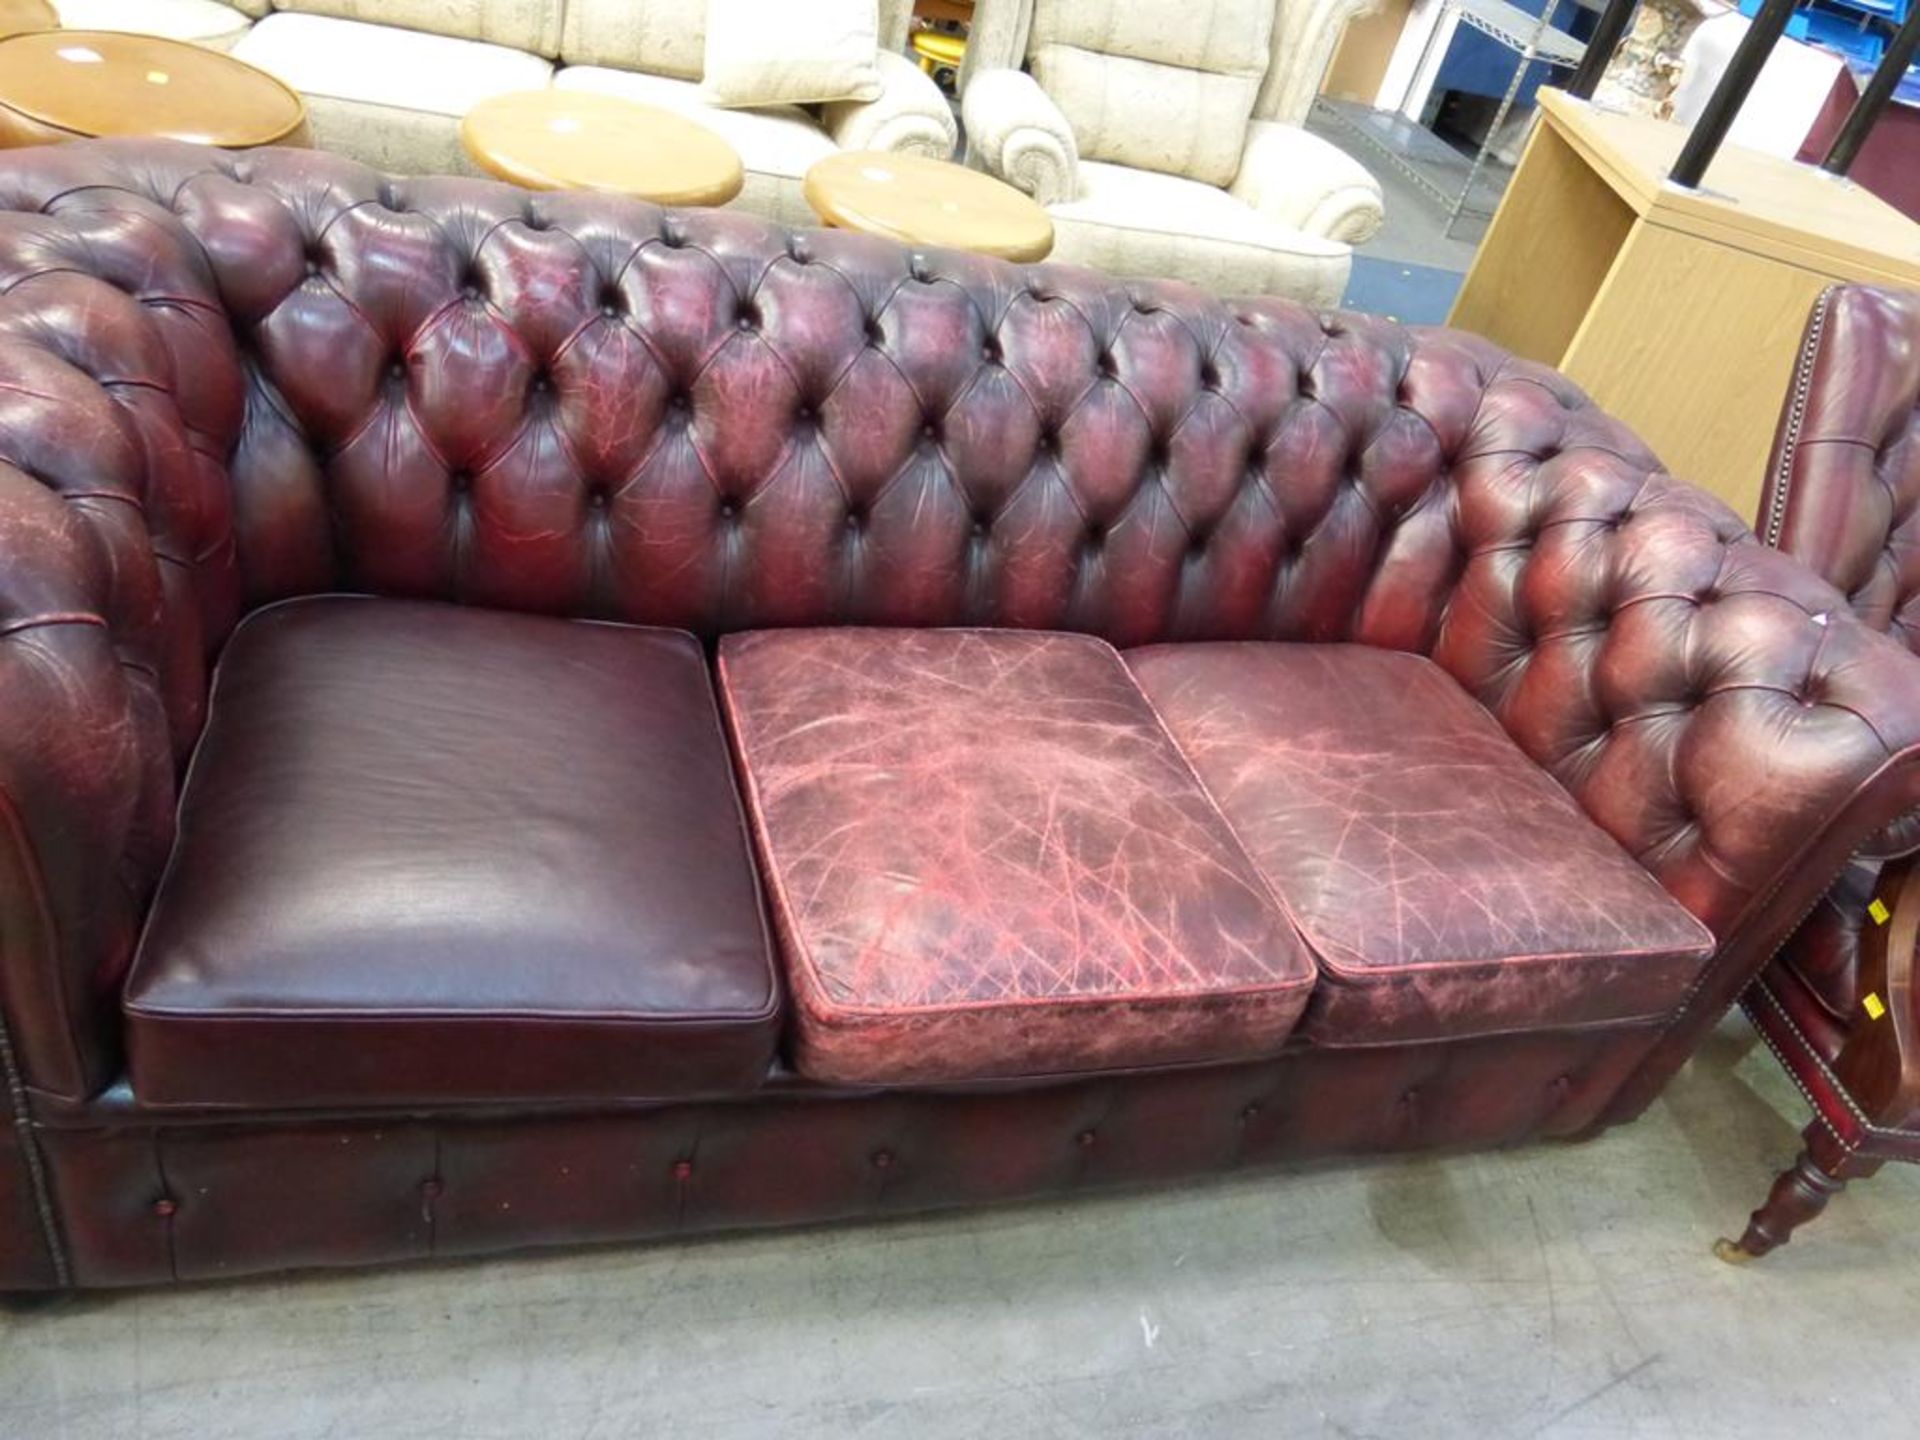 A red leather upholstered Chesterfield Three Seater Sofa (est £100-£200) - Image 2 of 2